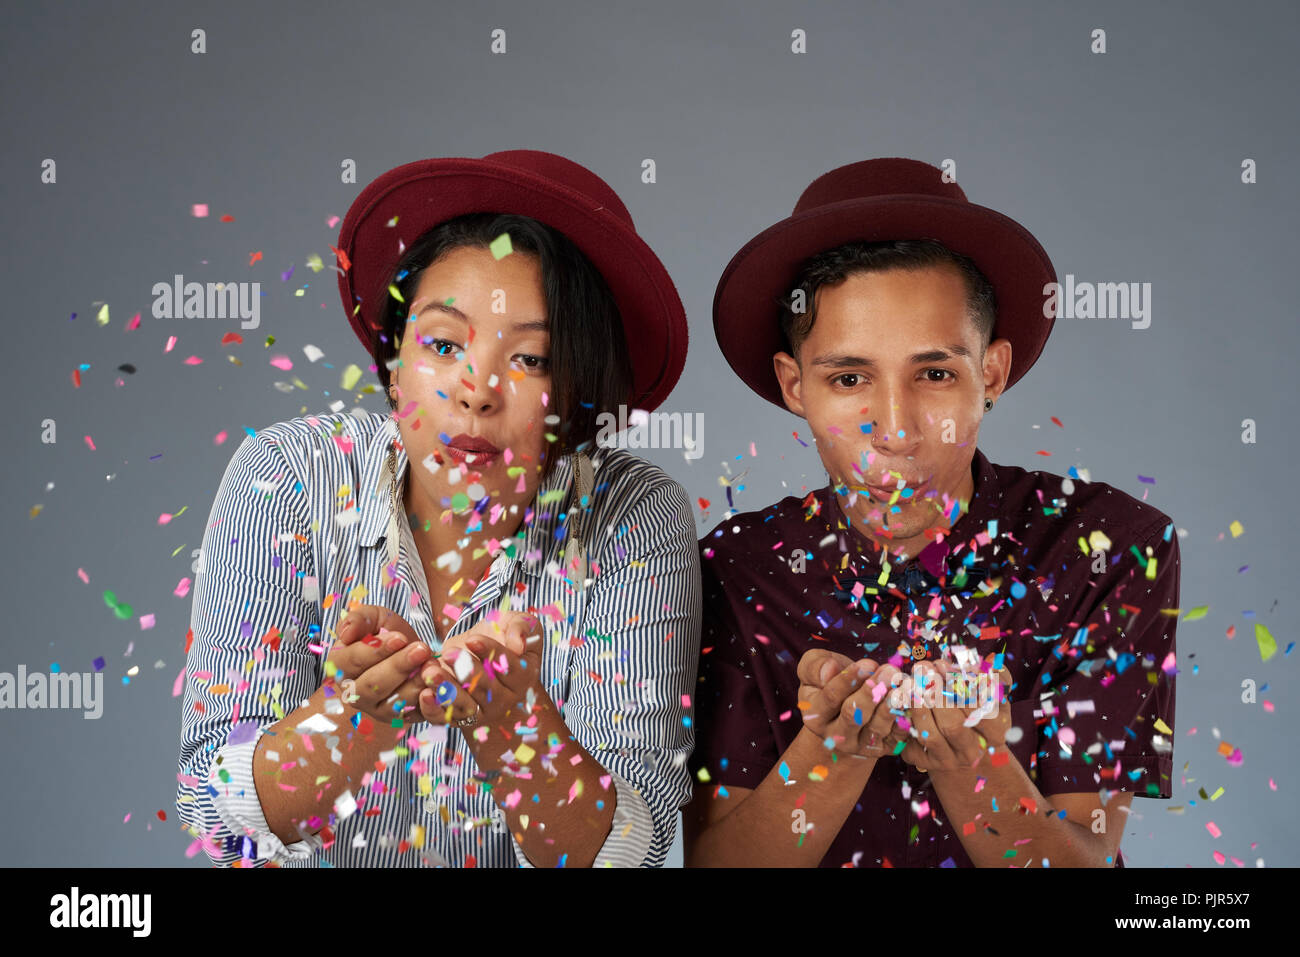 Fun moment of happy young people blowing colorful confetti Stock Photo